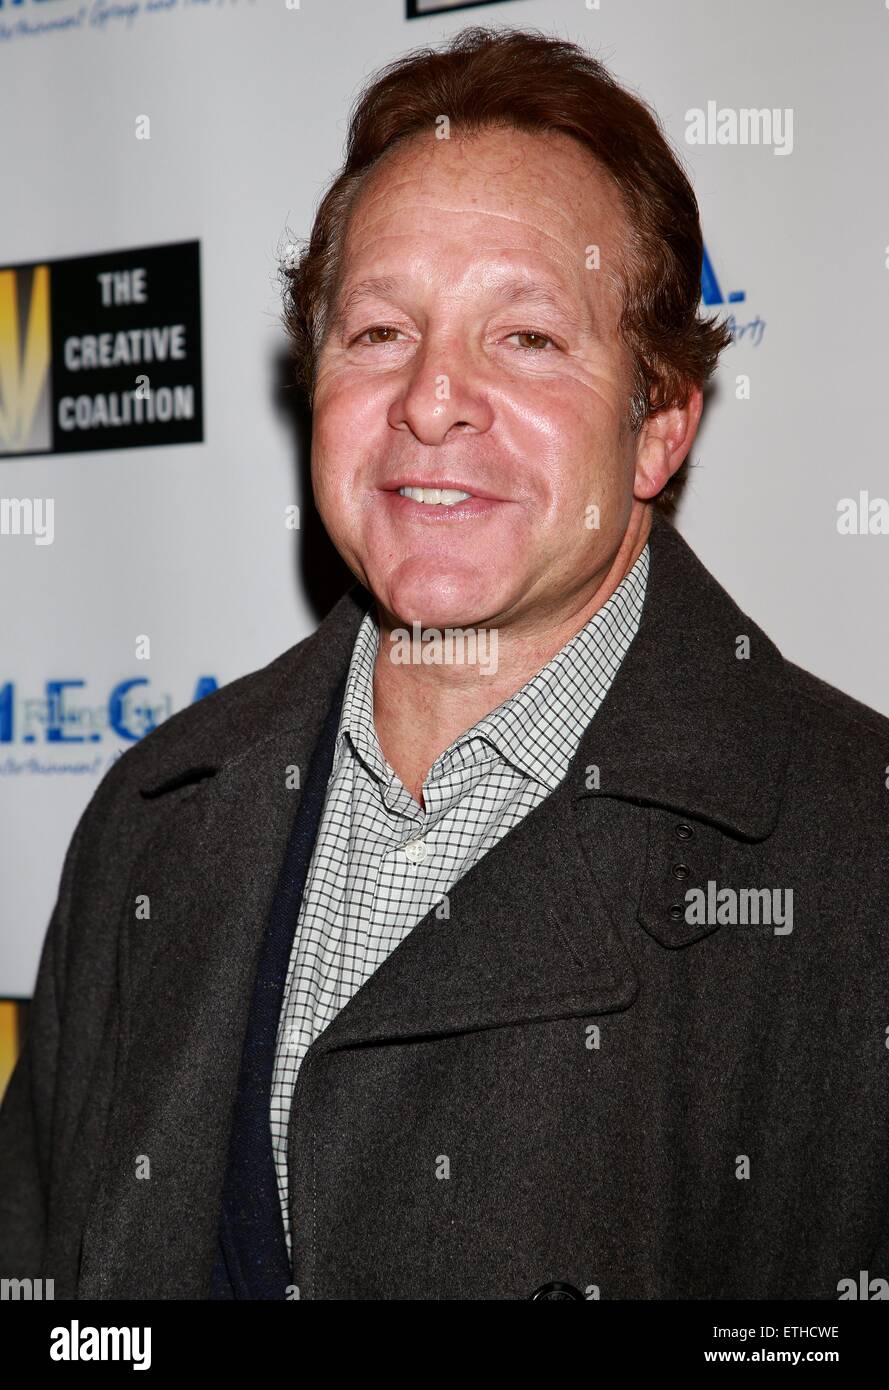 New York premiere party of 'Cop Show' at Caroline's On Broadway Comedy Club - Arrivals  Featuring: Steve Guttenberg Where: New York, New York, United States When: 24 Feb 2015 Credit: Joseph Marzullo/WENN.com Stock Photo